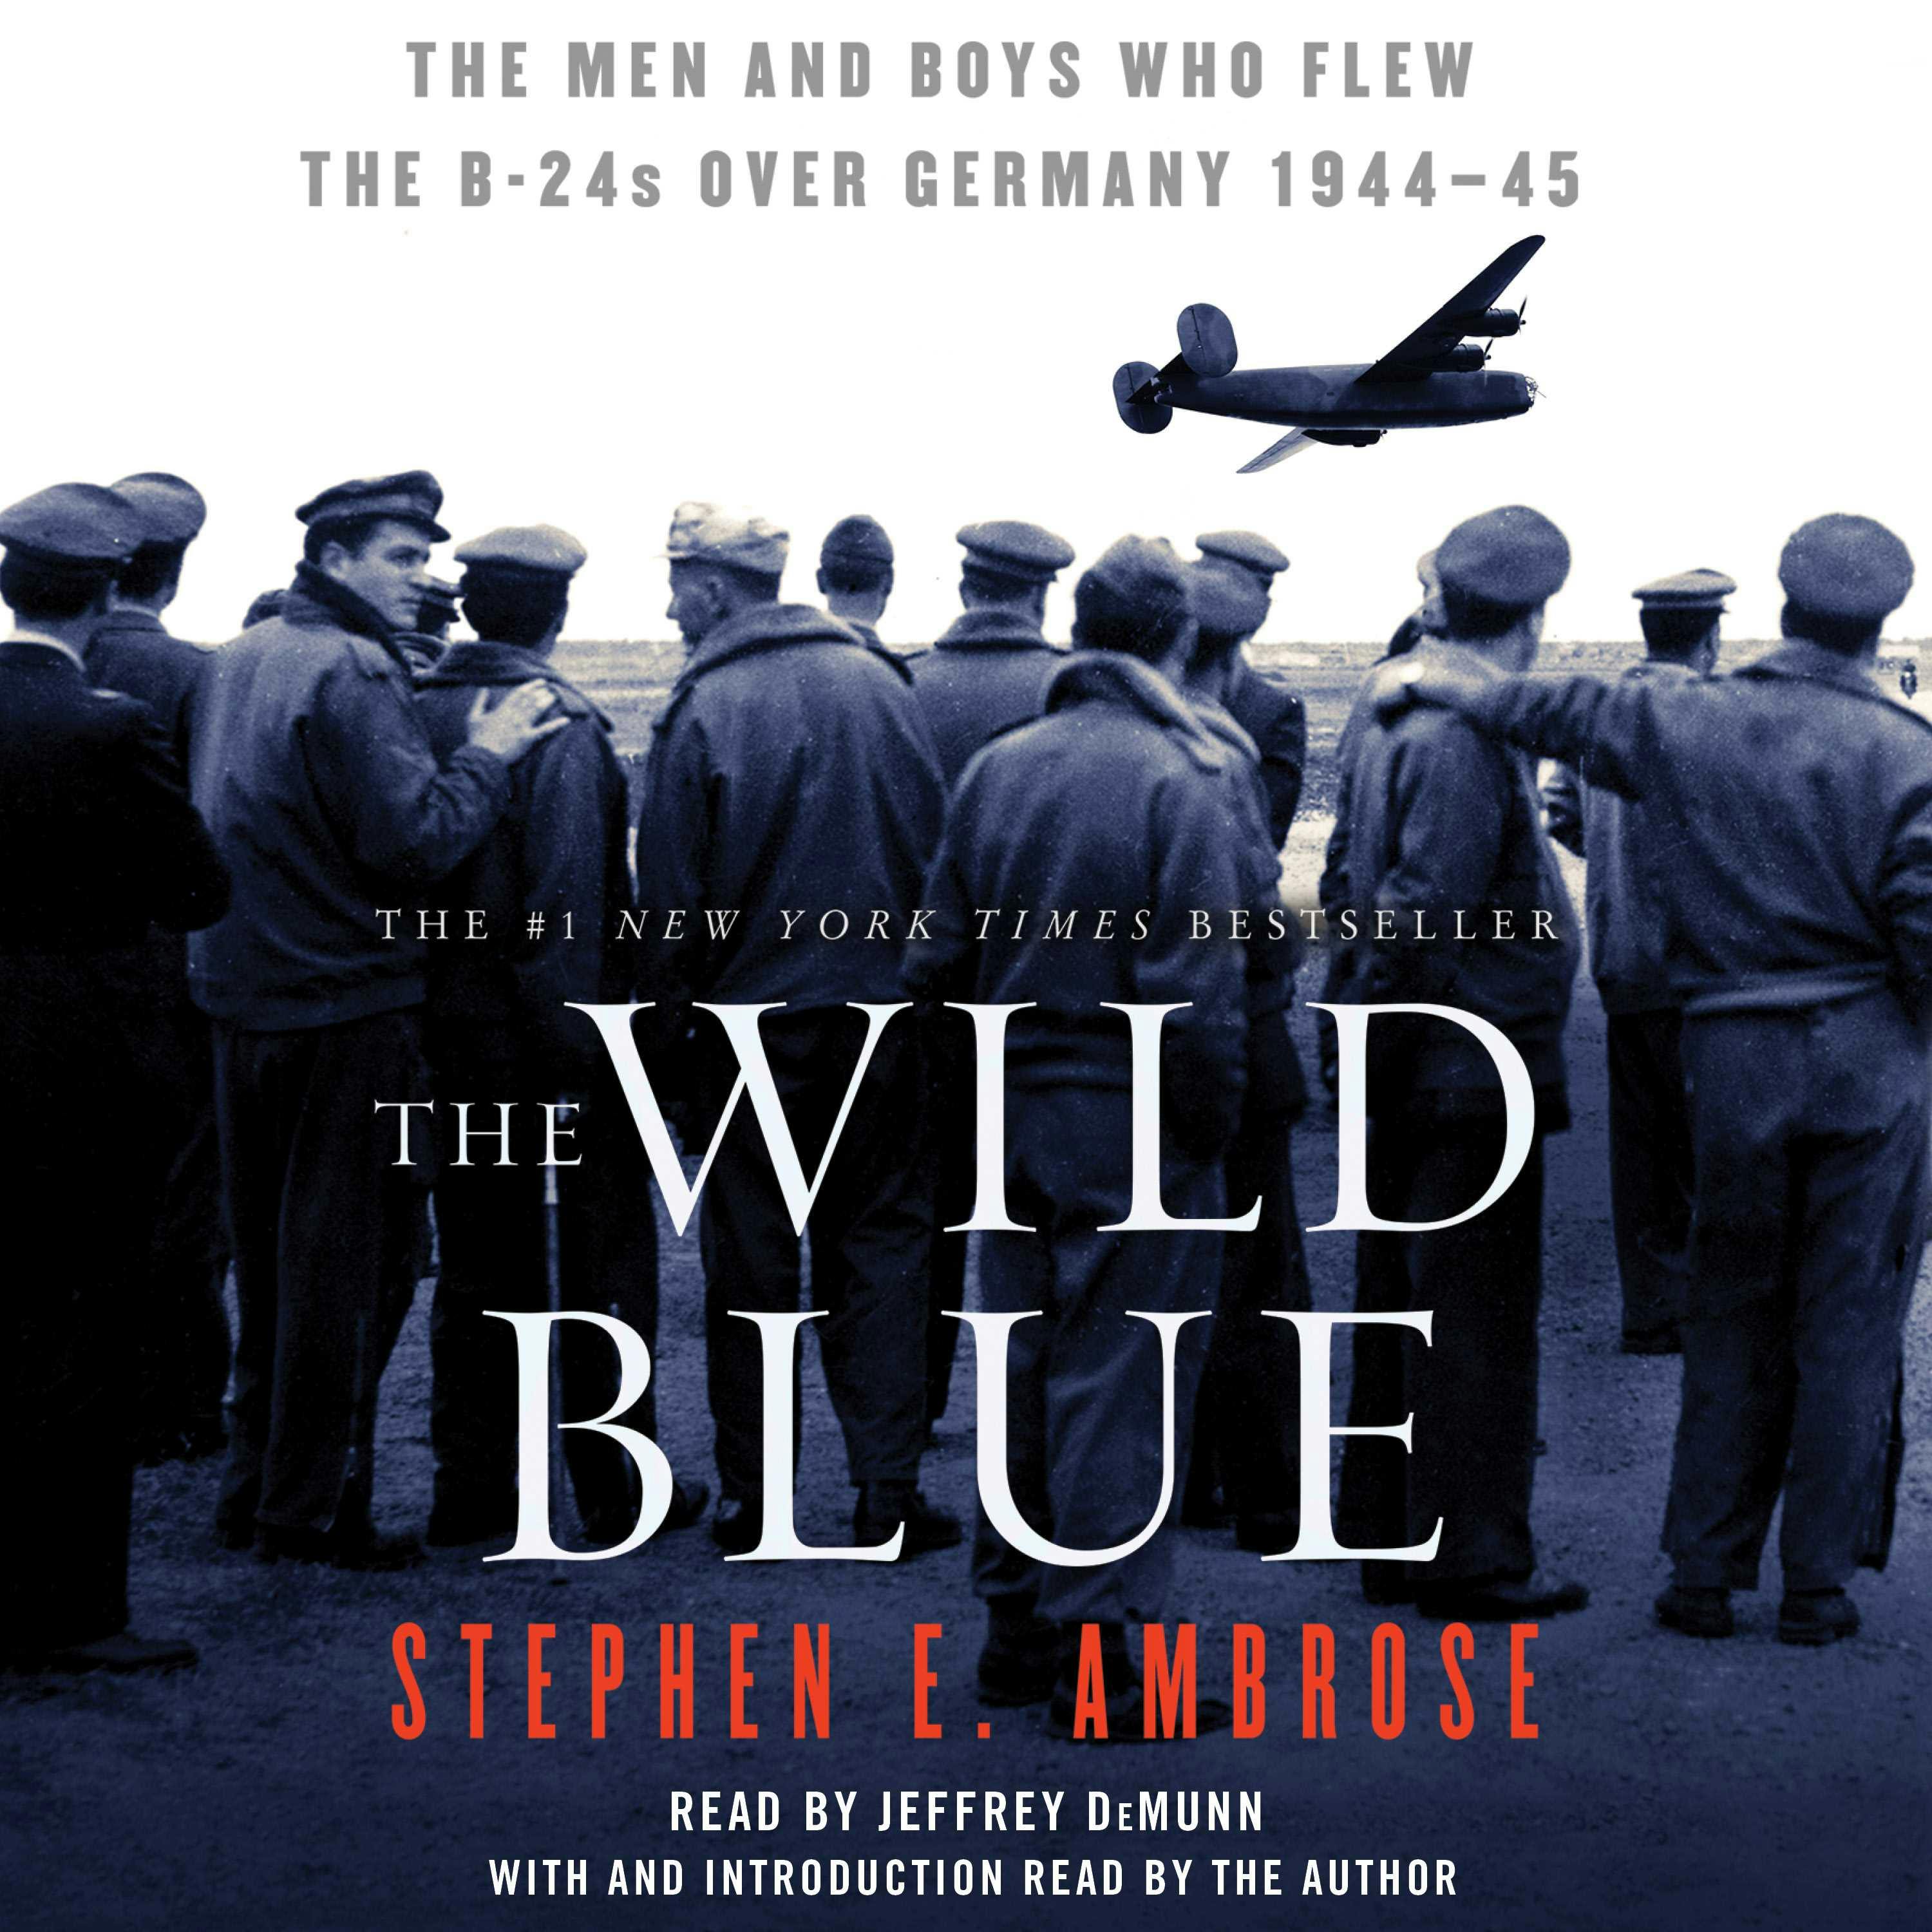 The Wild Blue: The Men and Boys Who Flew the B-24s Over Germany - Stephen E. Ambrose